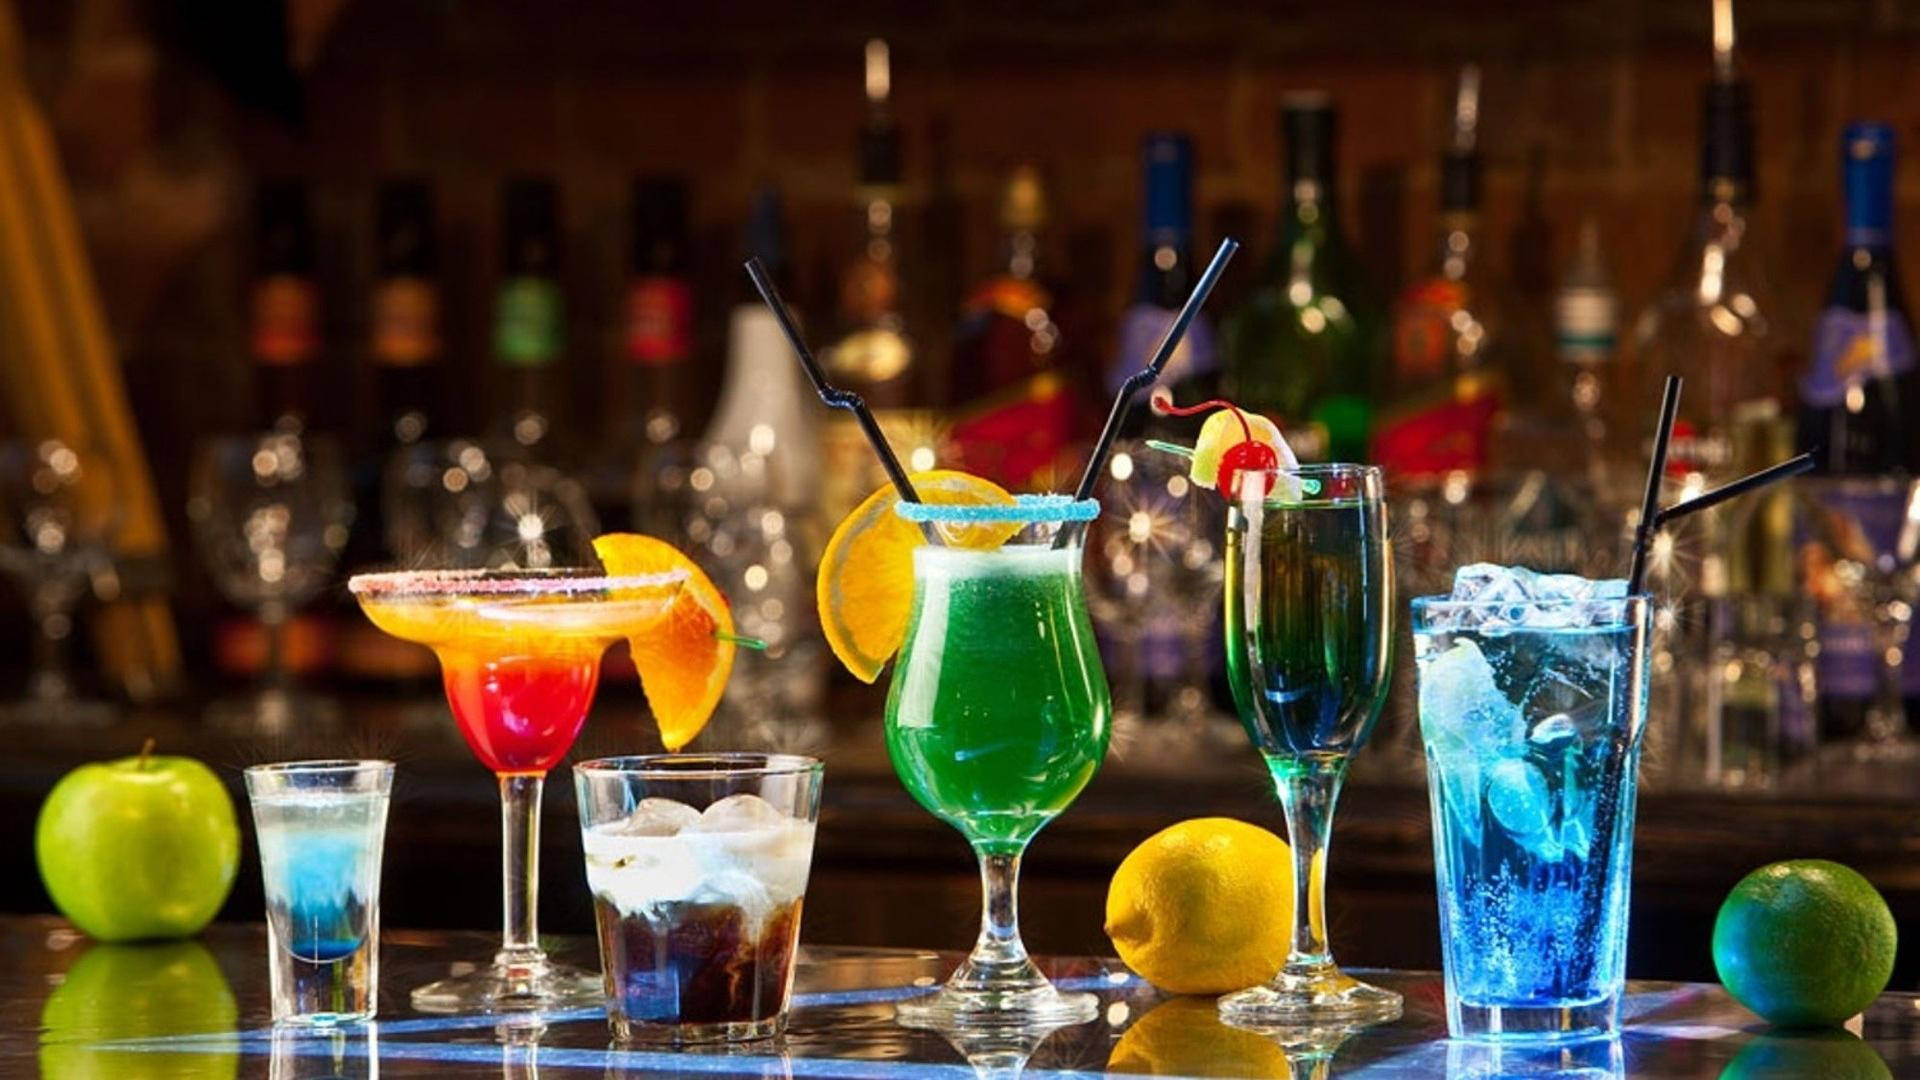 Download Drinks On Bar Counter Wallpaper